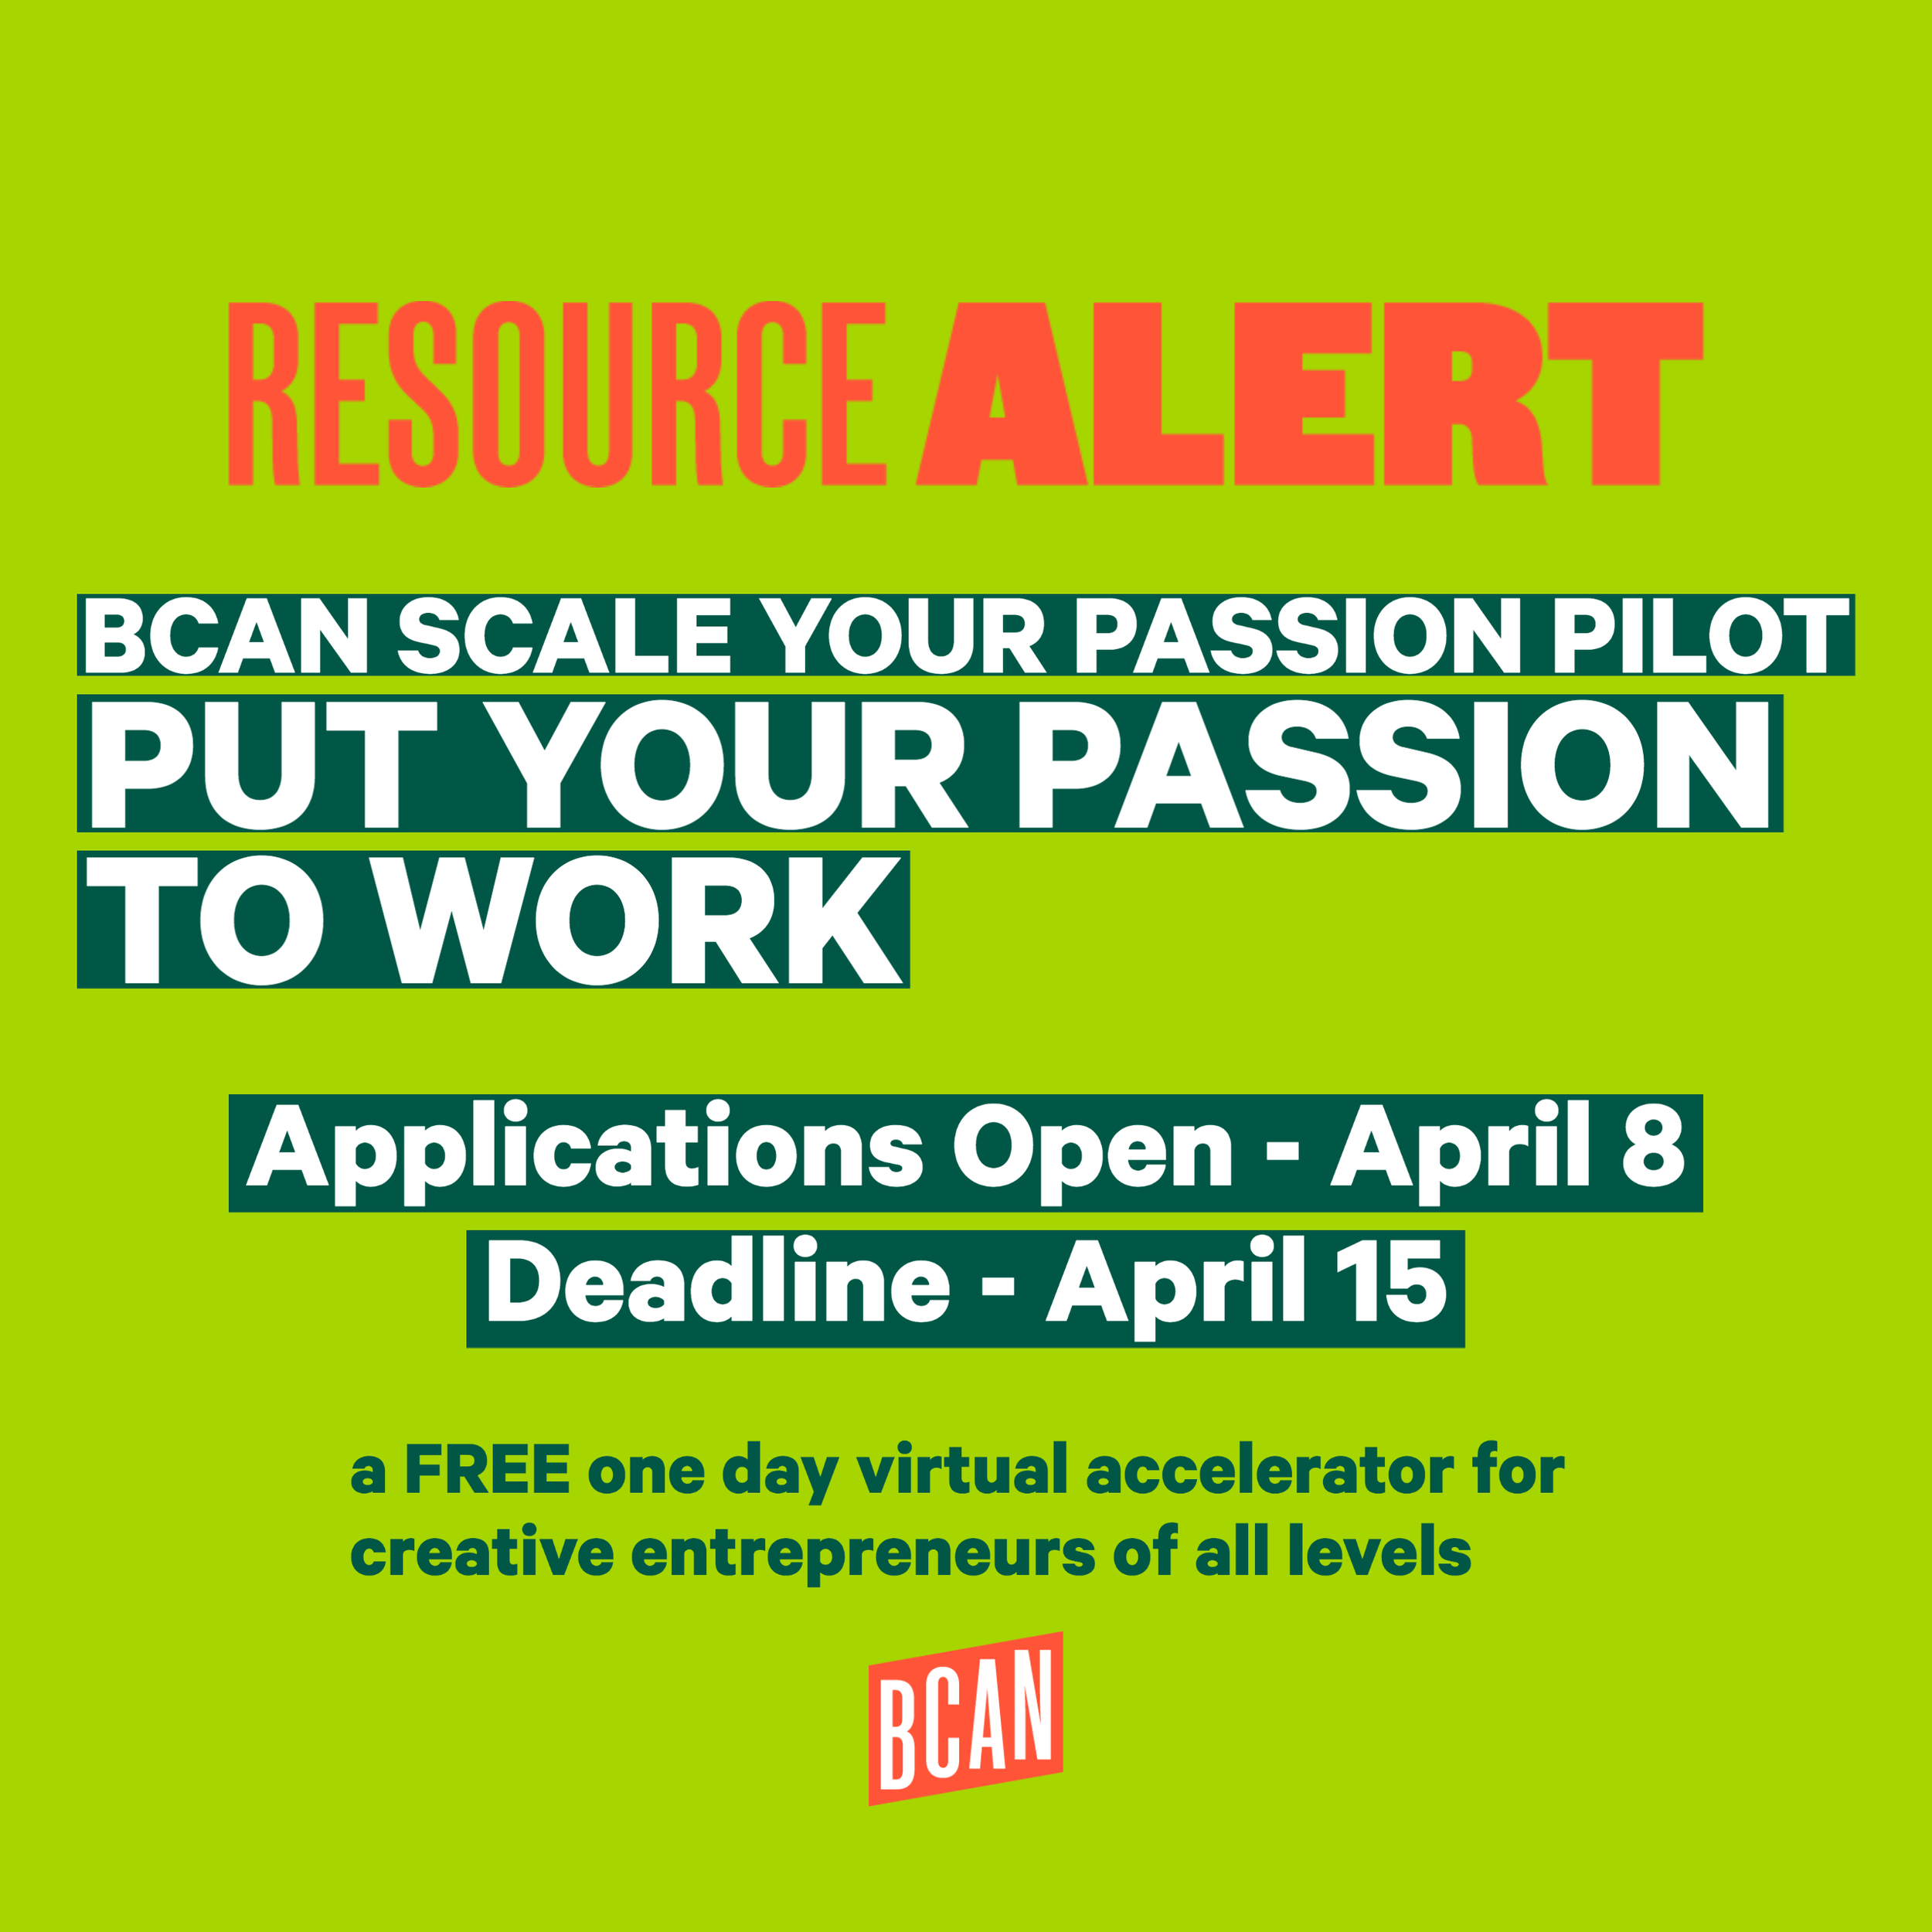 SYP Pilot Put Your Passion to Work Resource Alert